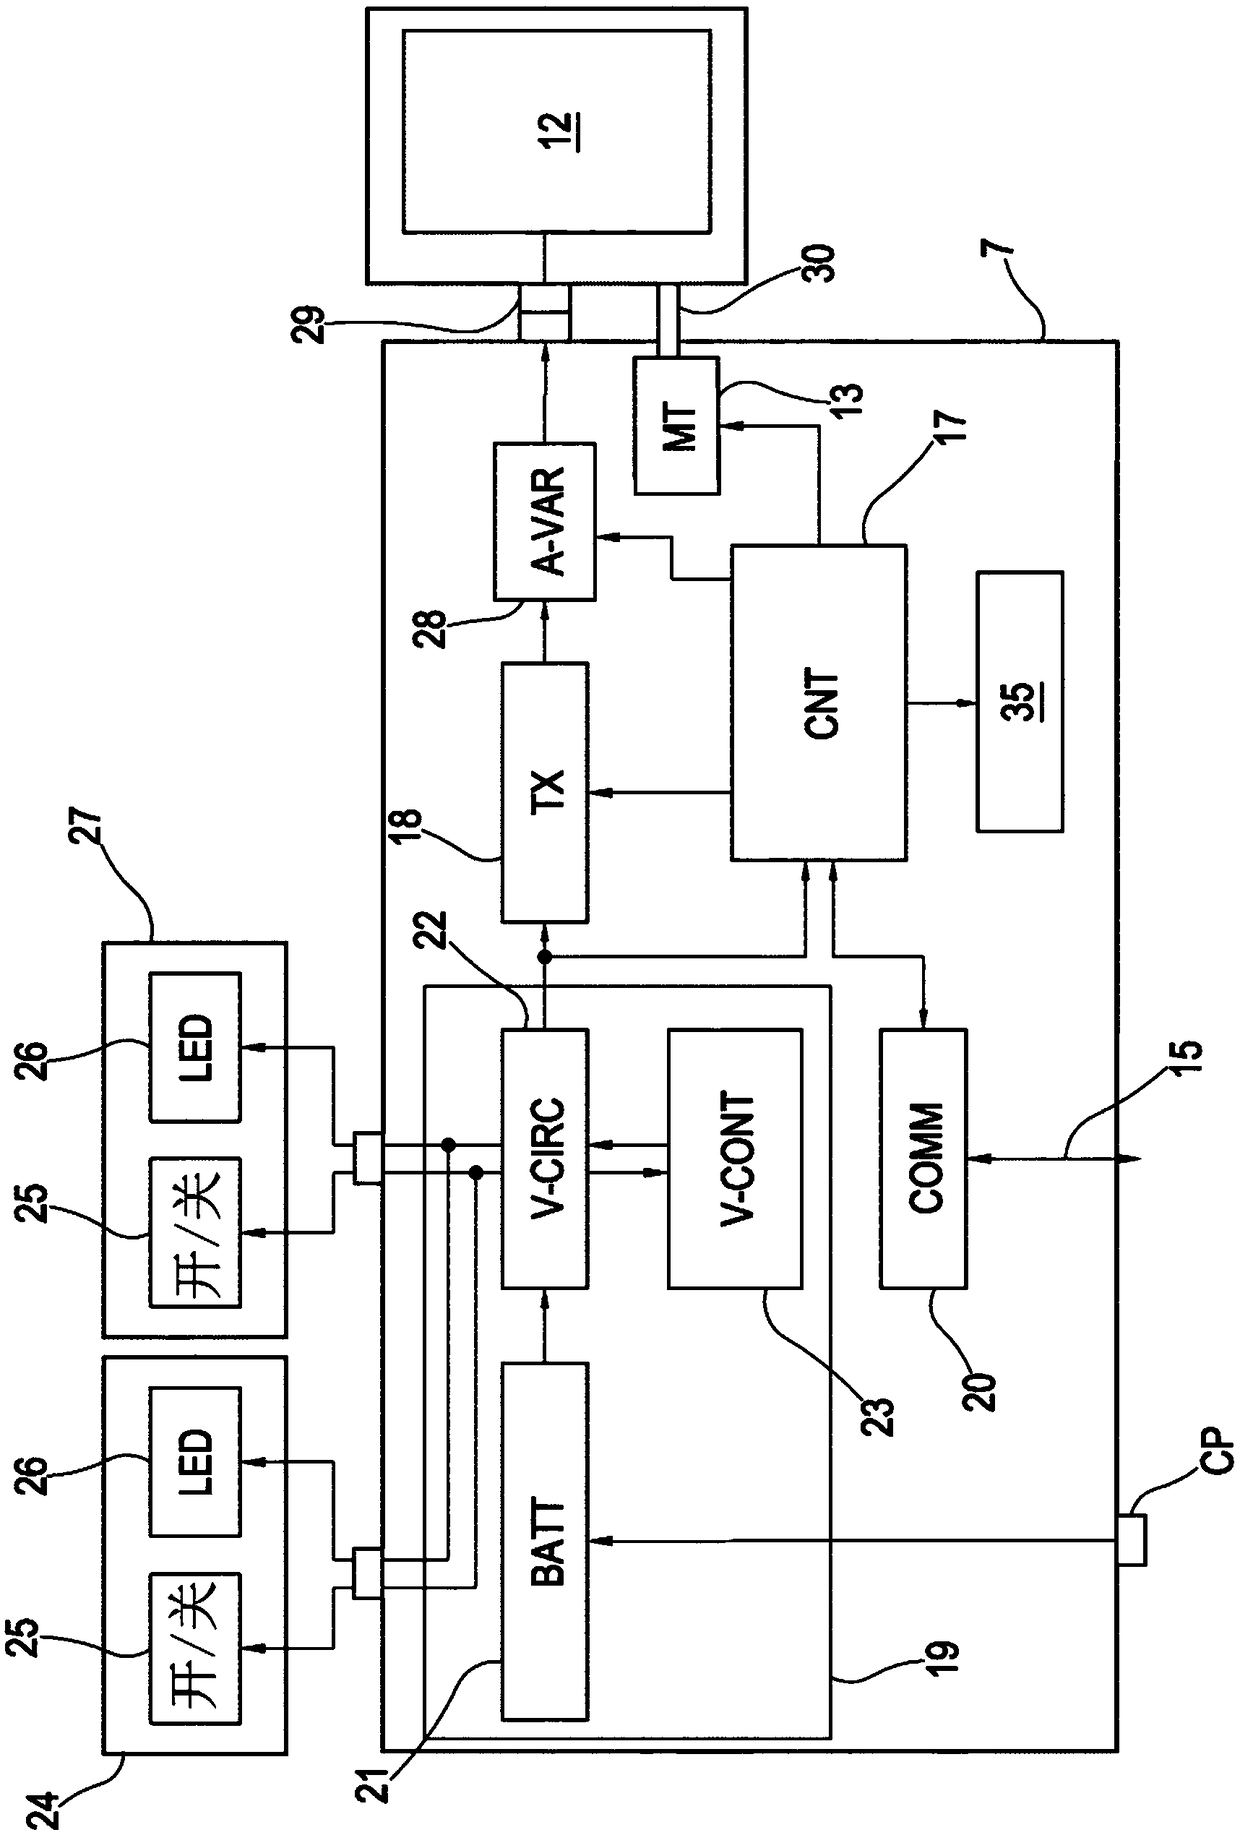 A tissue anomaly detection apparatus comprising a probe transmitter device